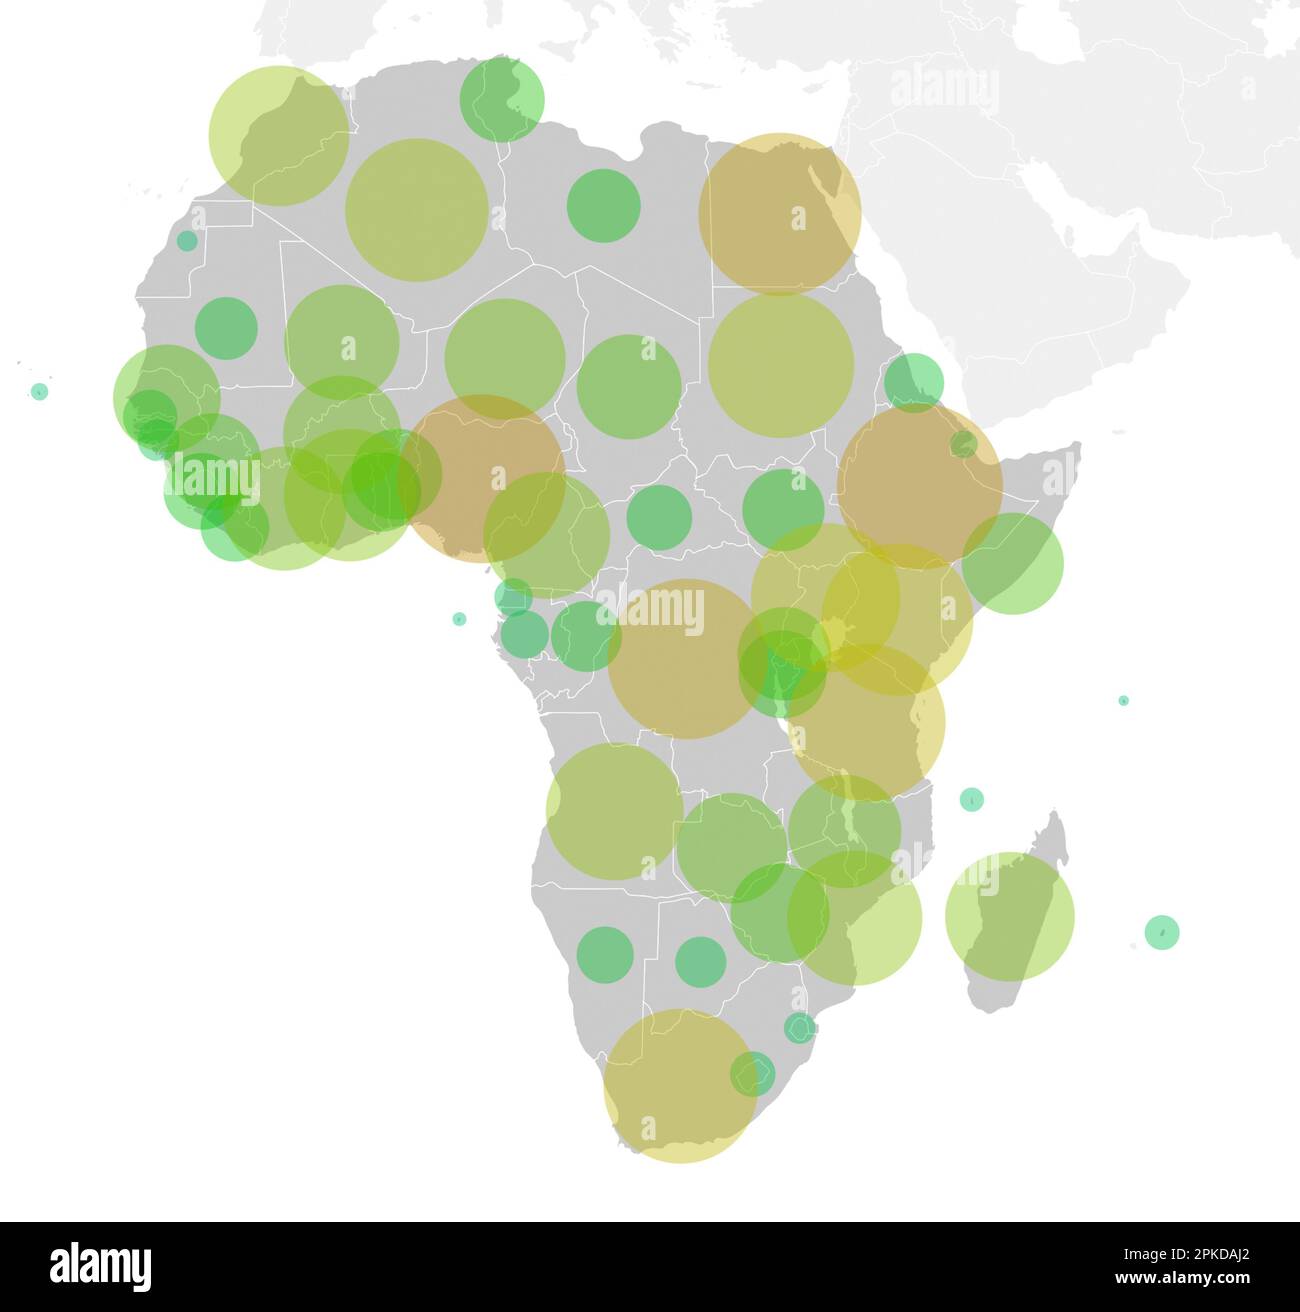 Map of Africa continent with green to orange circles representing population in each country. Graphic illustration of population in African countries. Stock Photo